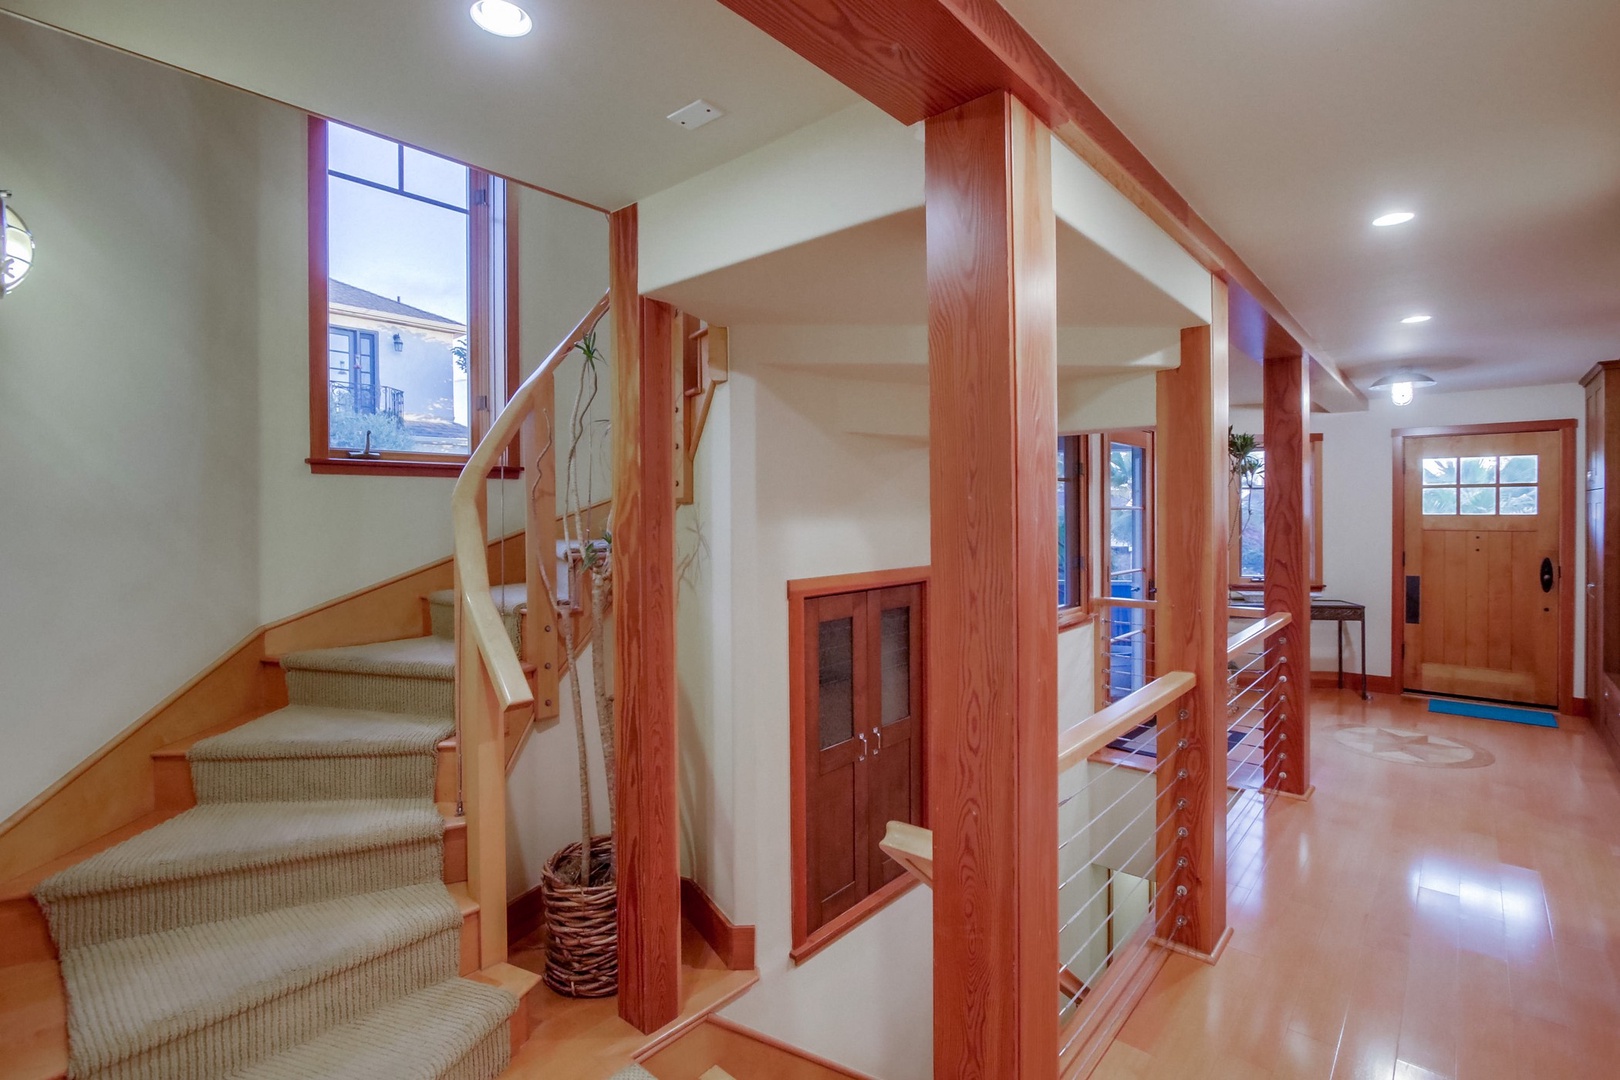 Stairs to garage and living area